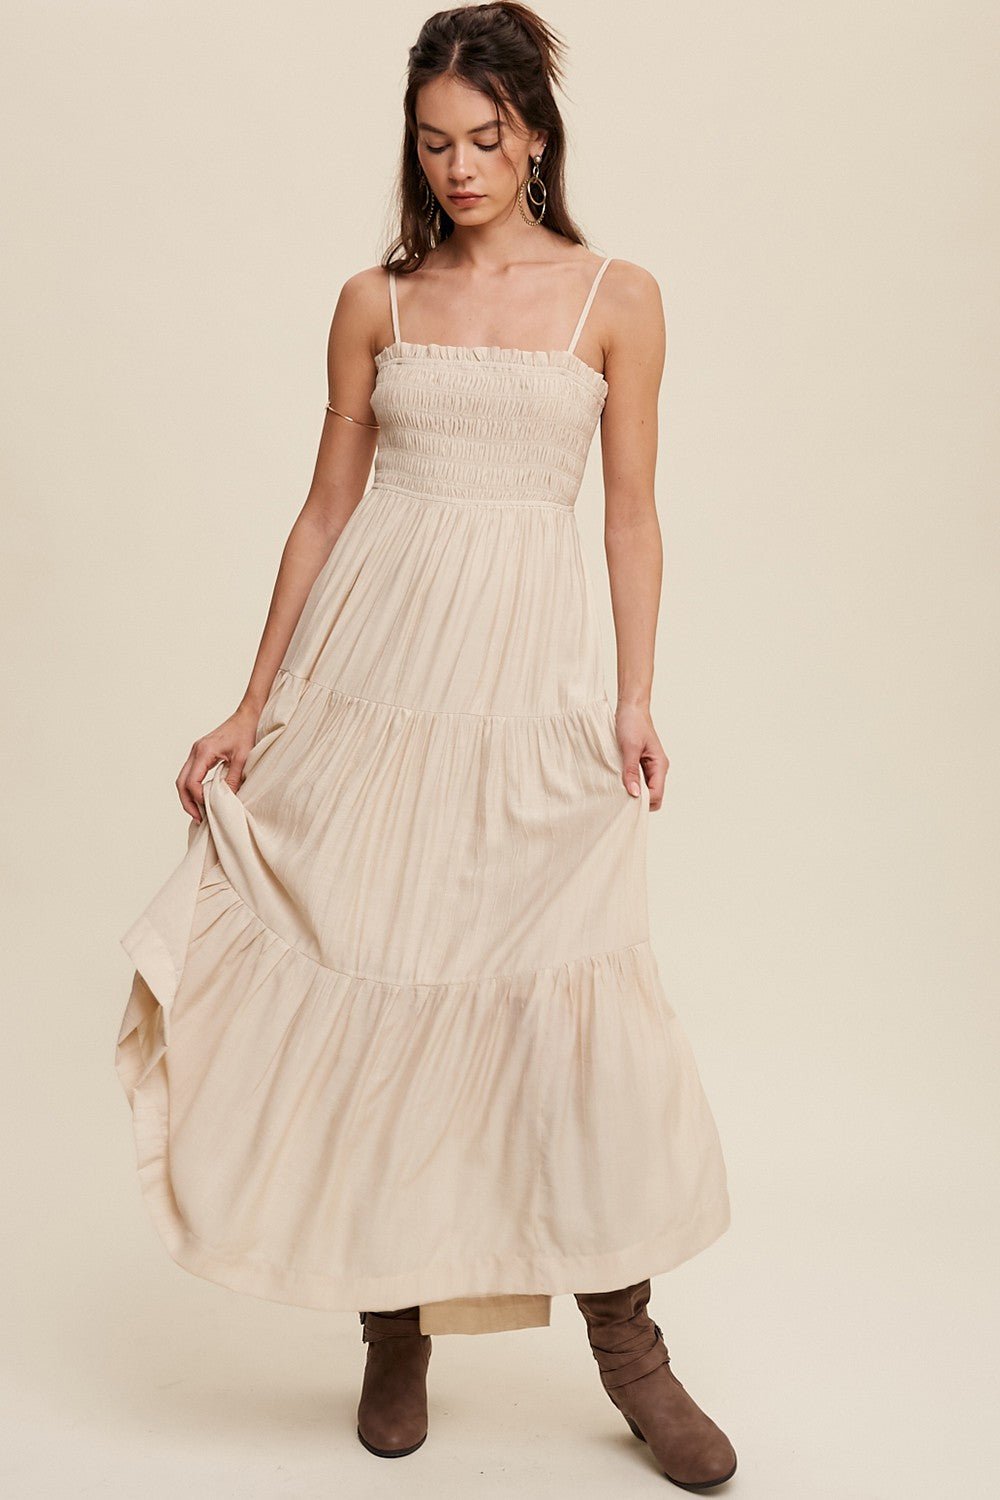 "Through The Field" Dress (Natural) - Happily Ever Aften